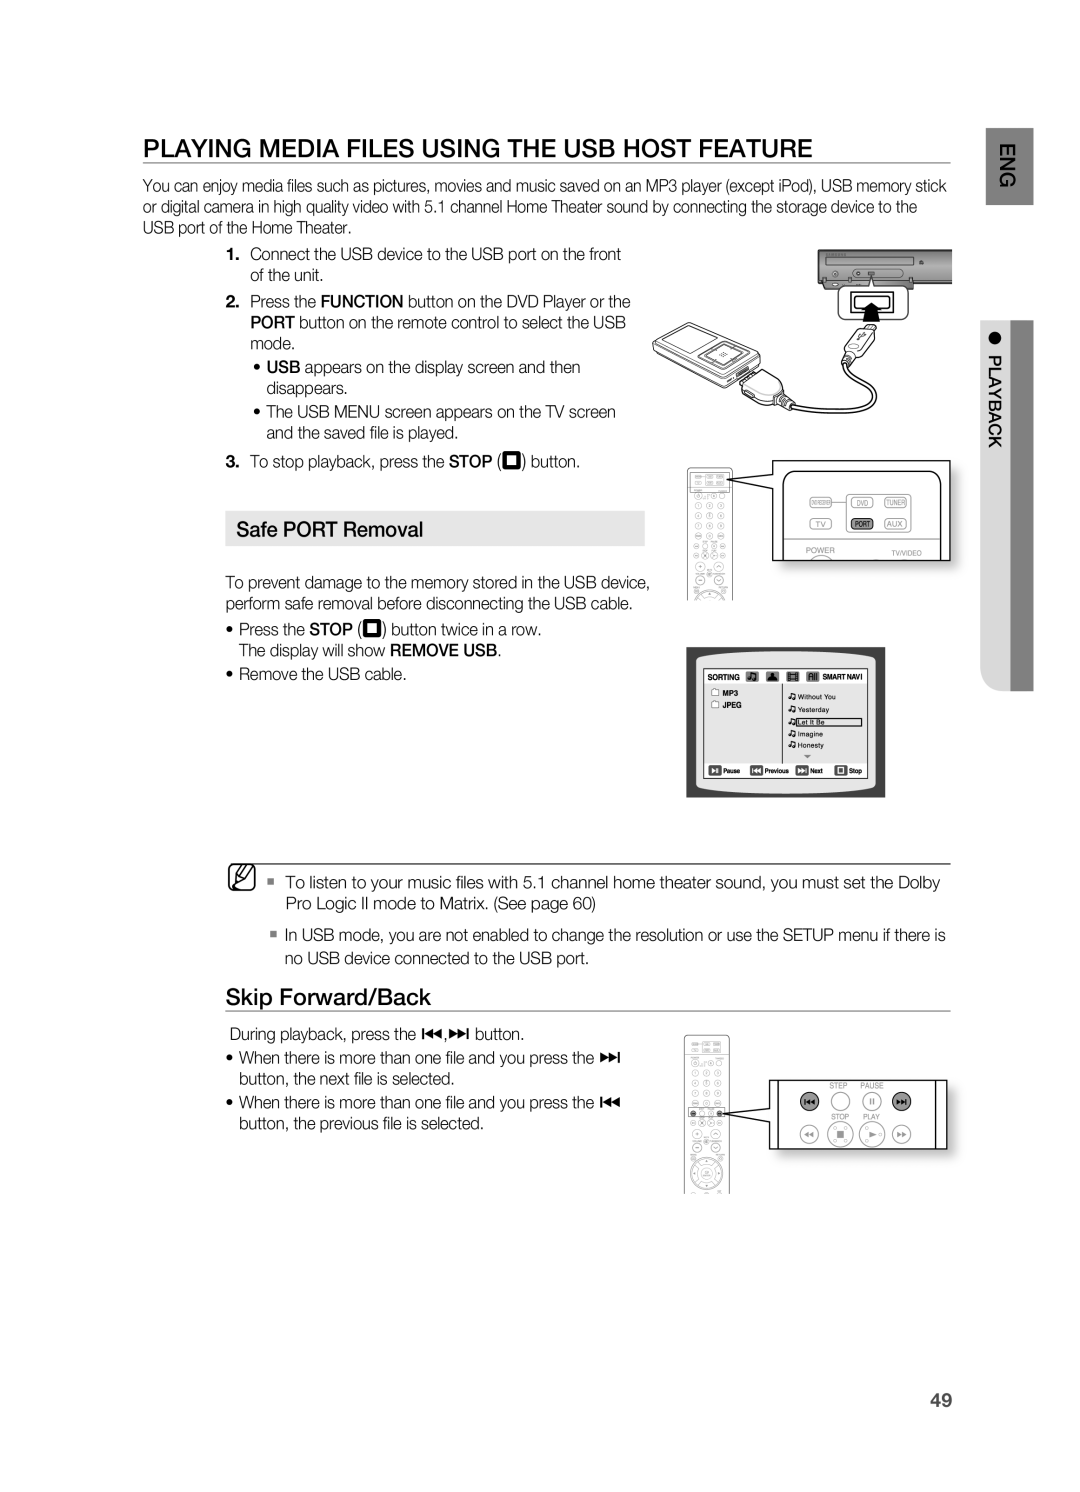 Samsung AH68-02055S manual PLayinG mEDia fiLES USinG tHE USB HOSt fEatUrE, Safe POrt removal, Skip forward/Back 